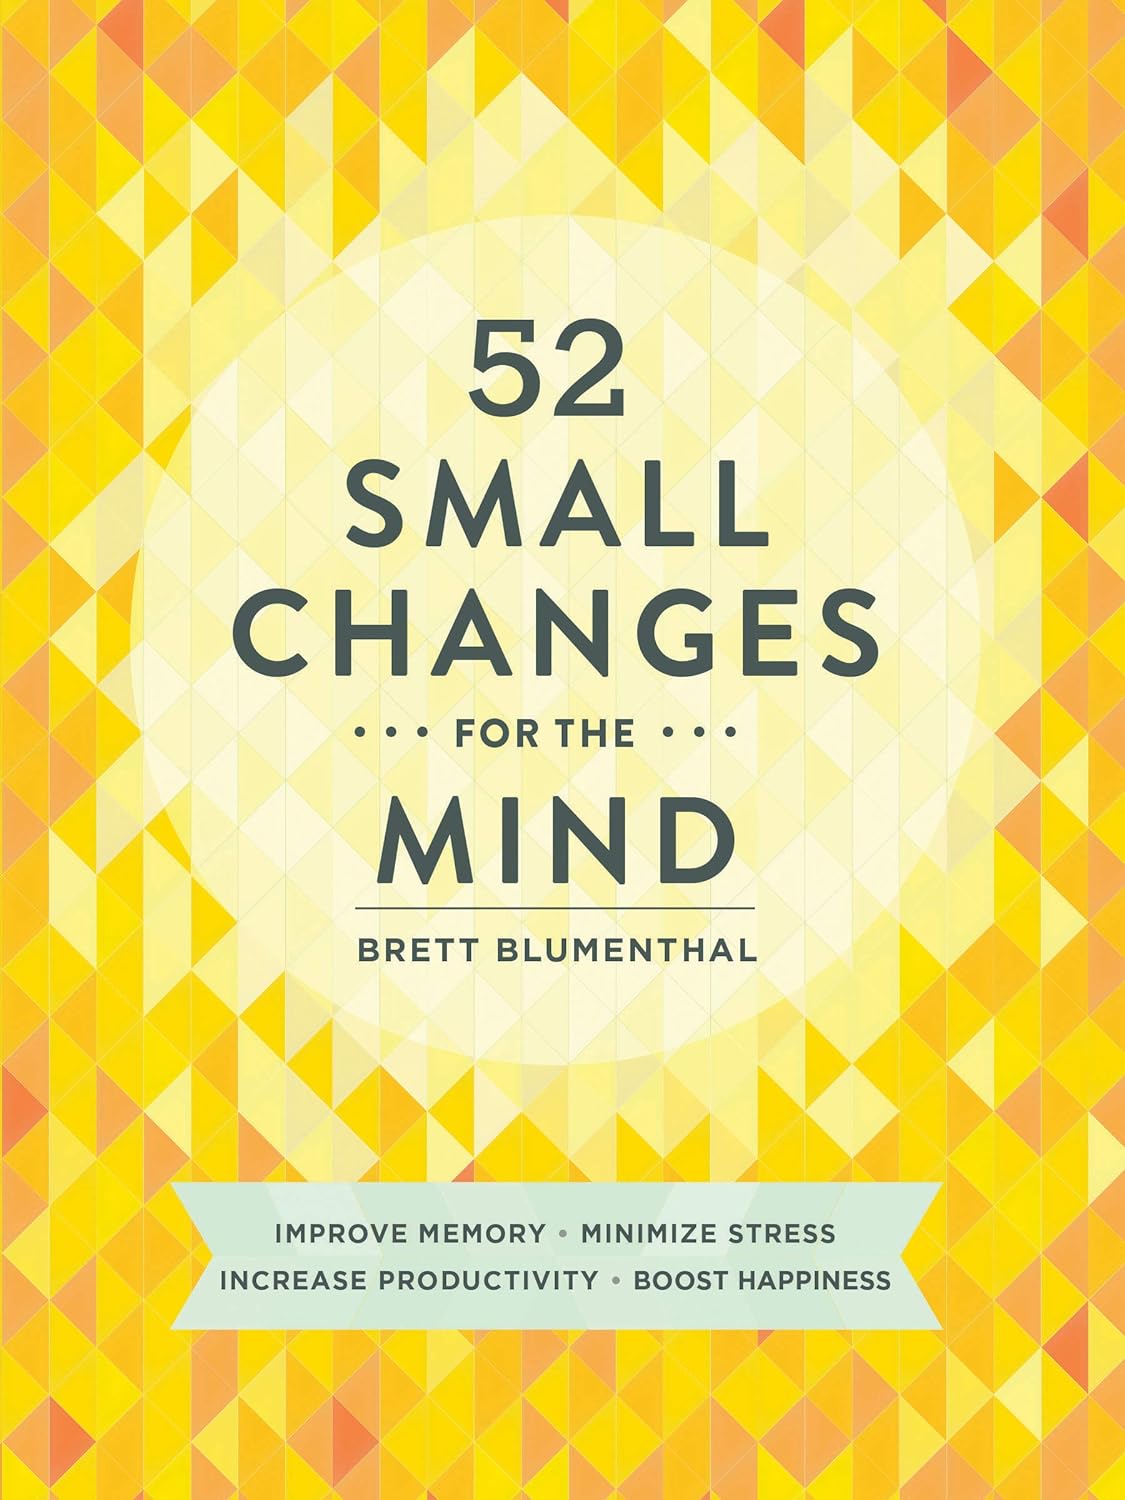 52 Small Changes For The Mind